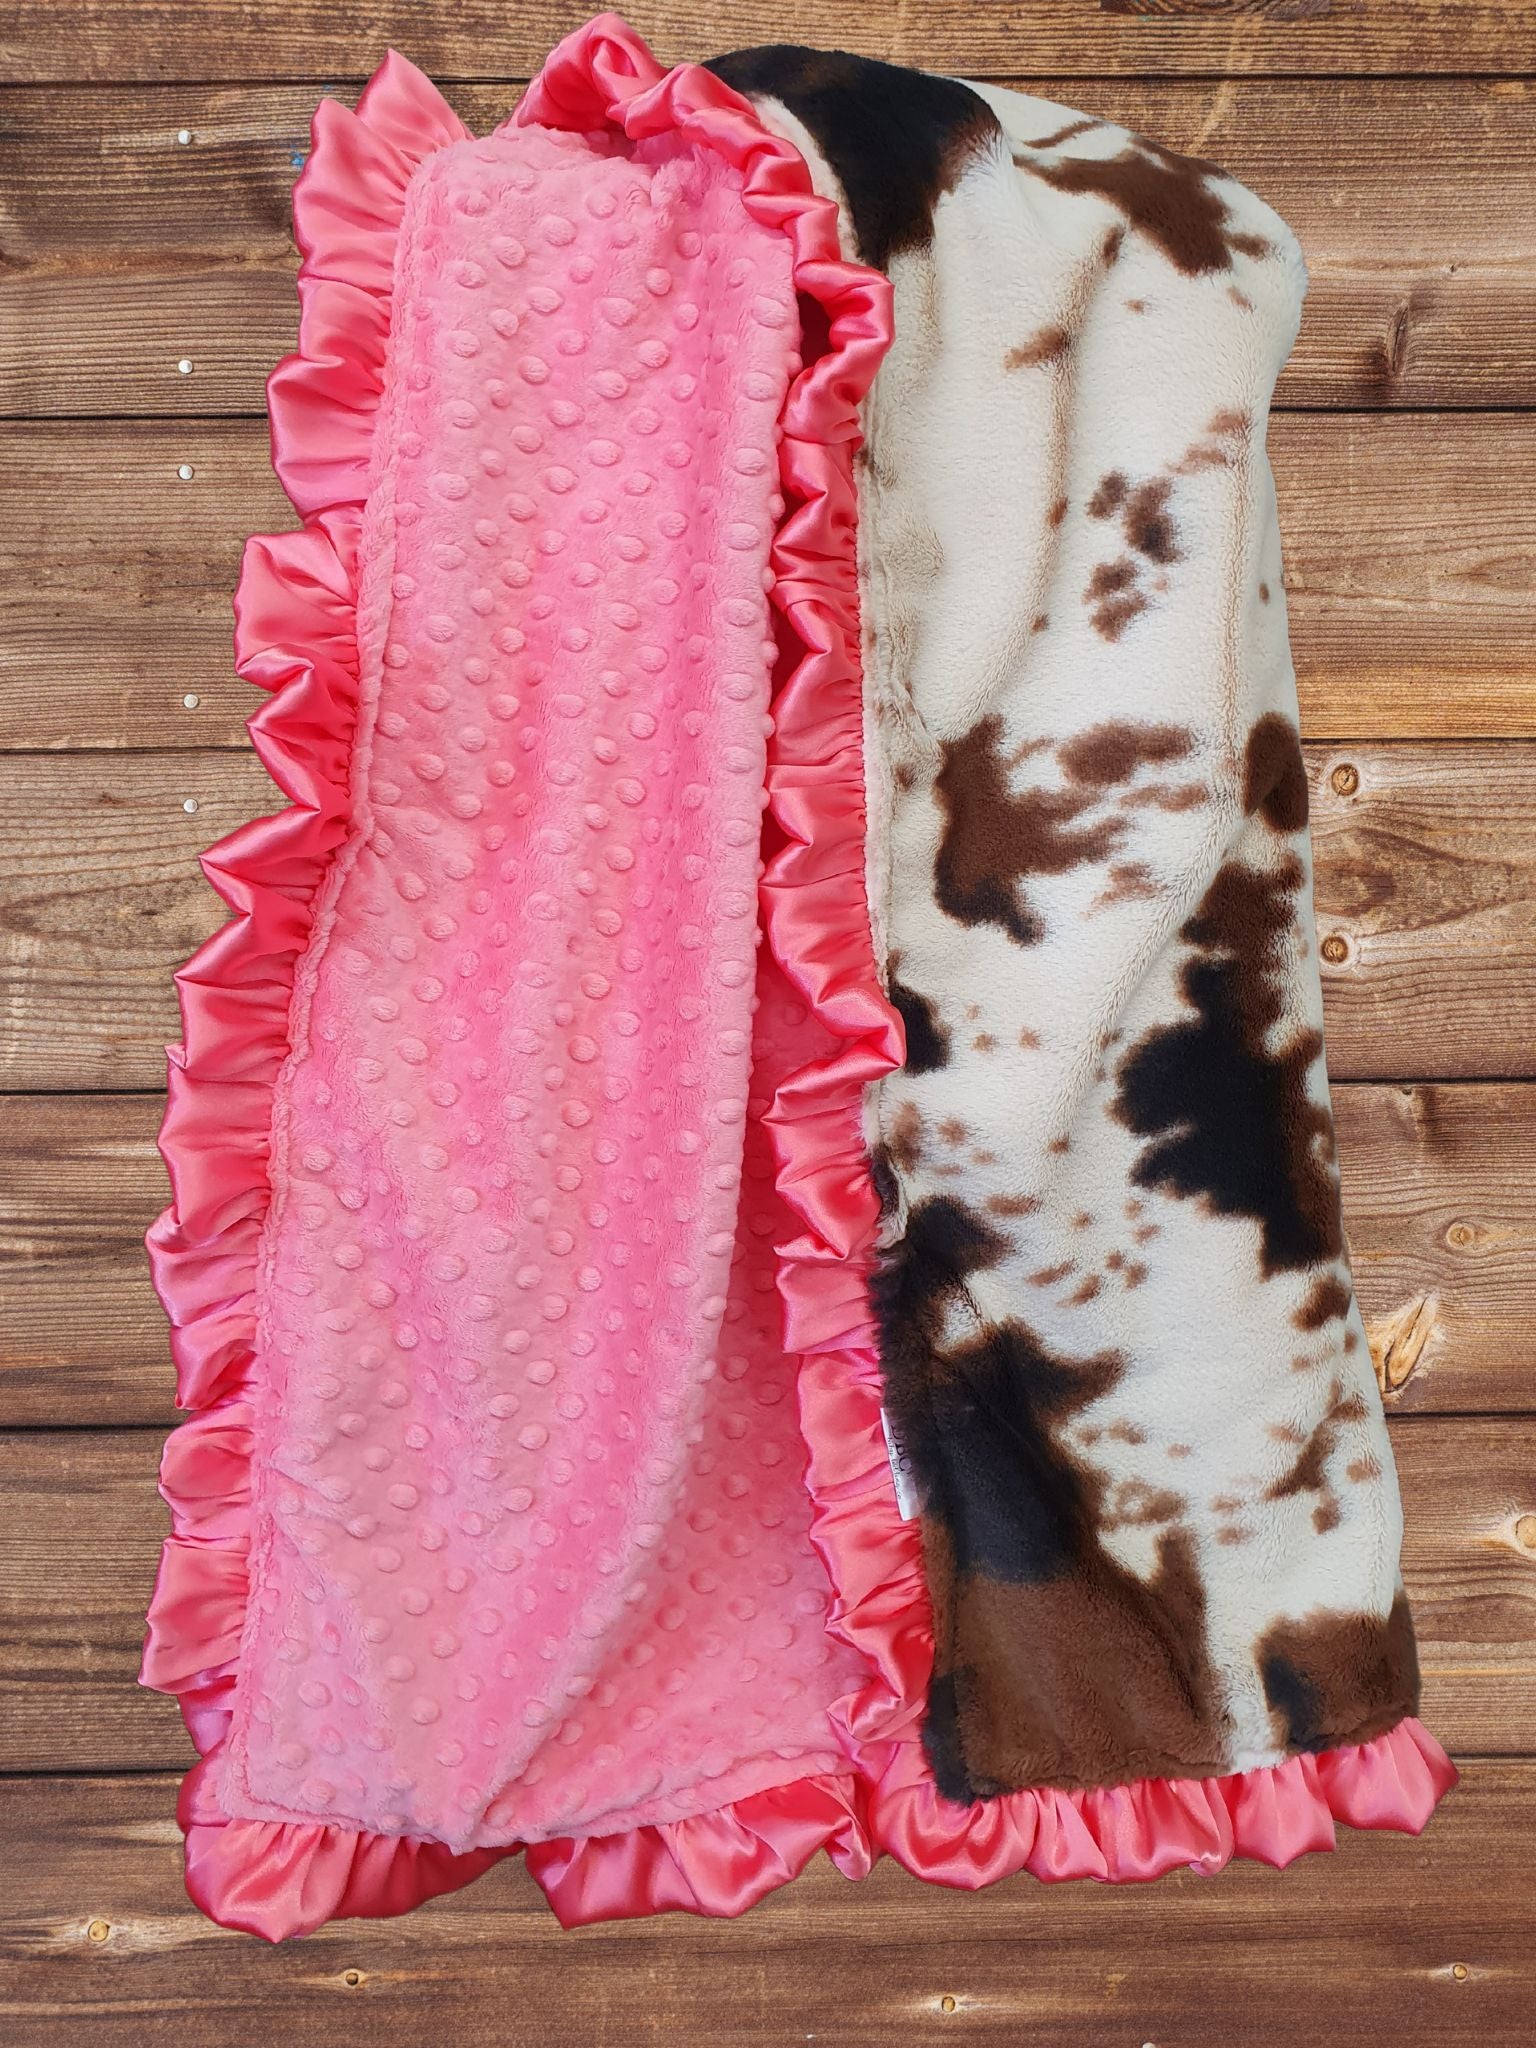 Baby Ruffle Blanket - Cow Minky and Coral Minky Western Blanket - DBC Baby Bedding Co 